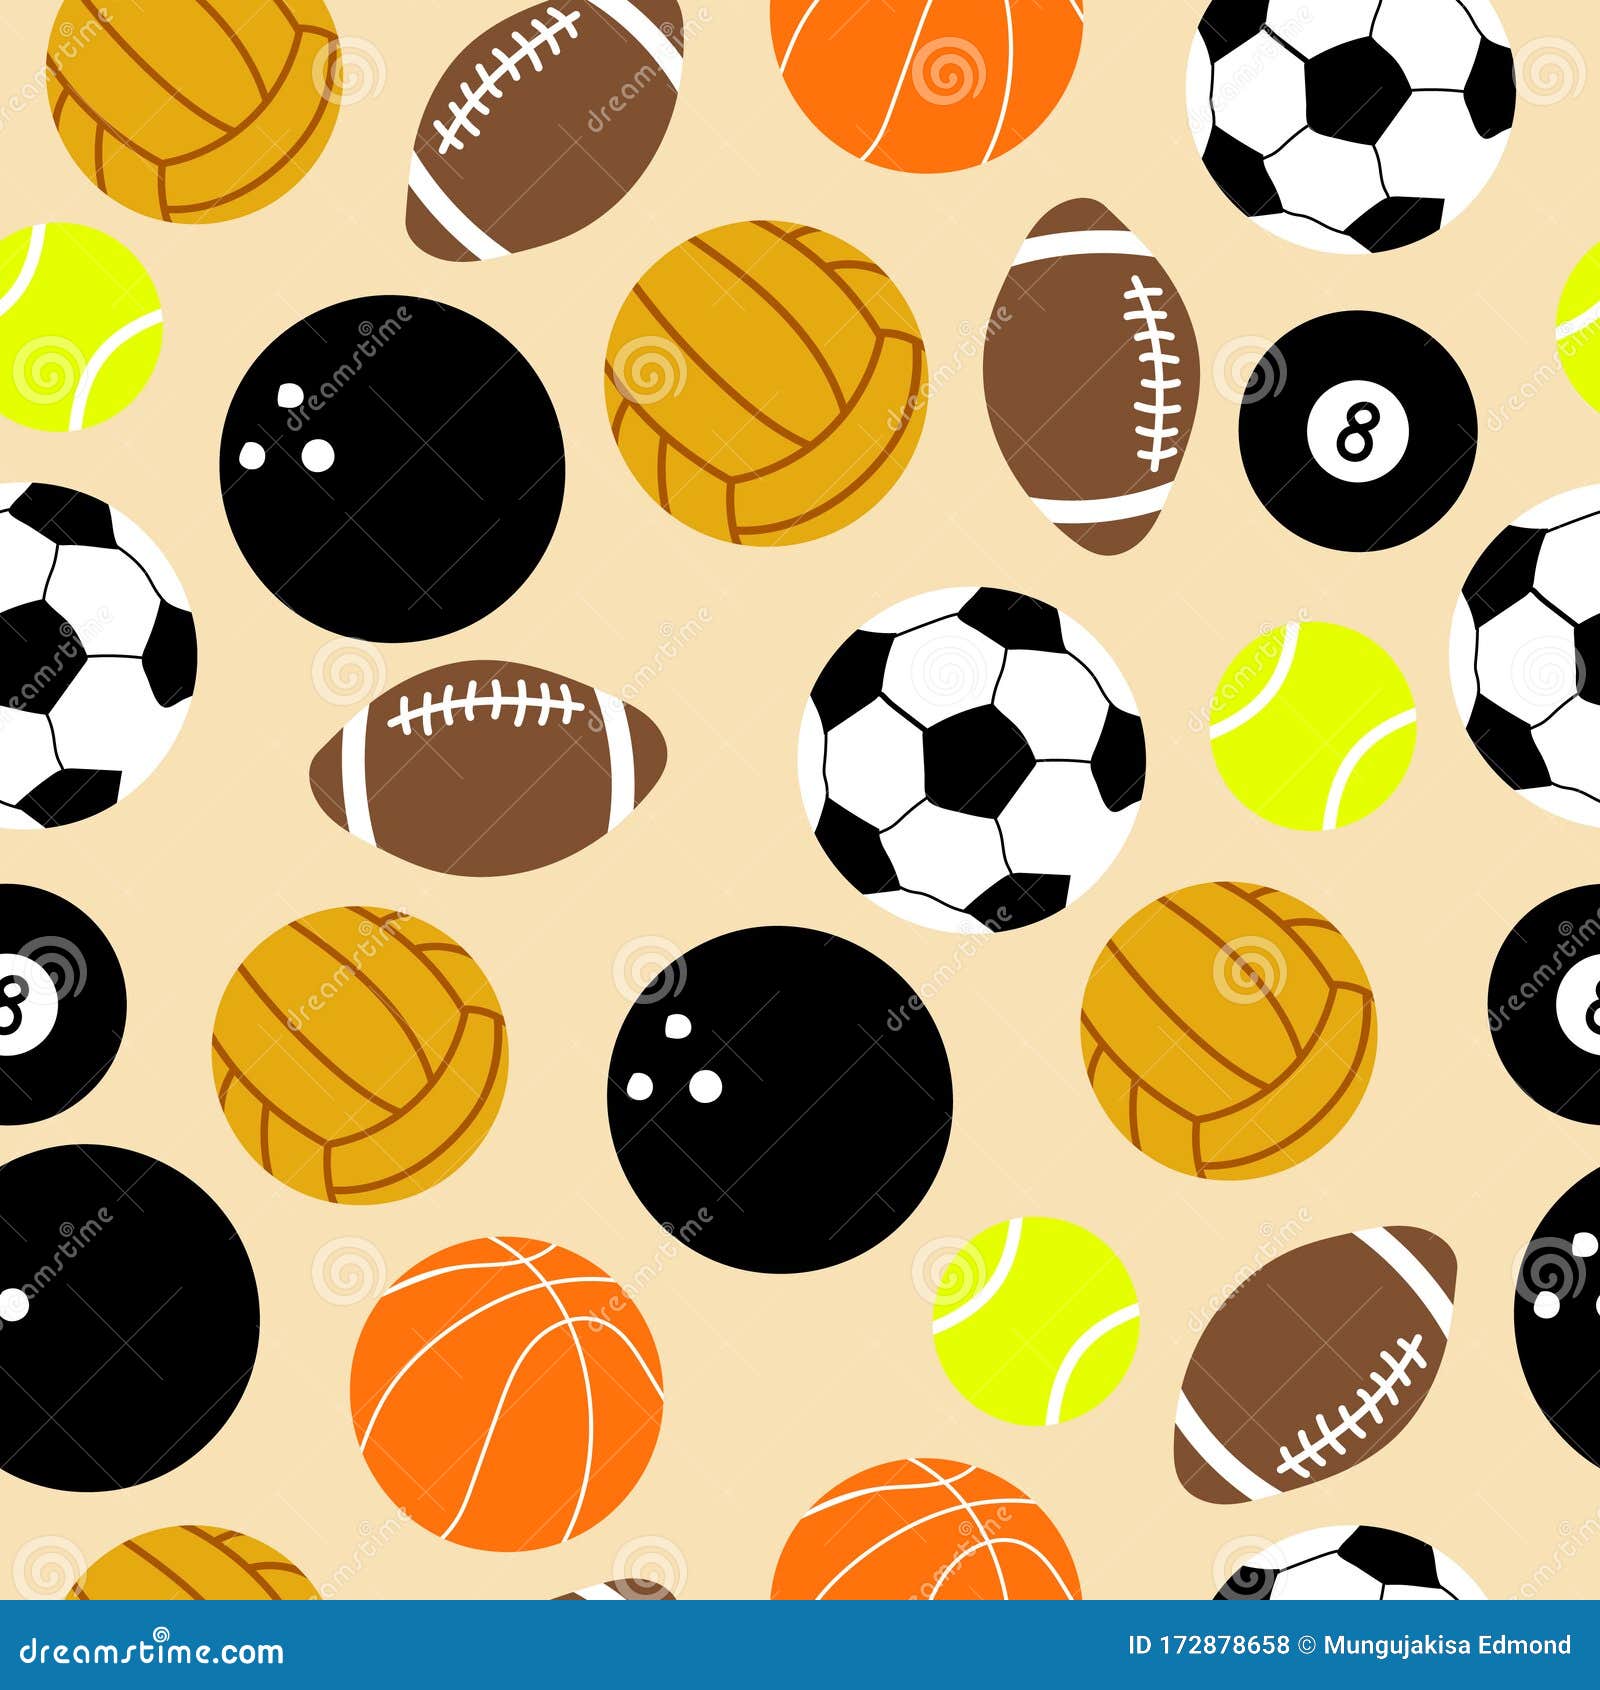 ball collection seamless and tillable pattern